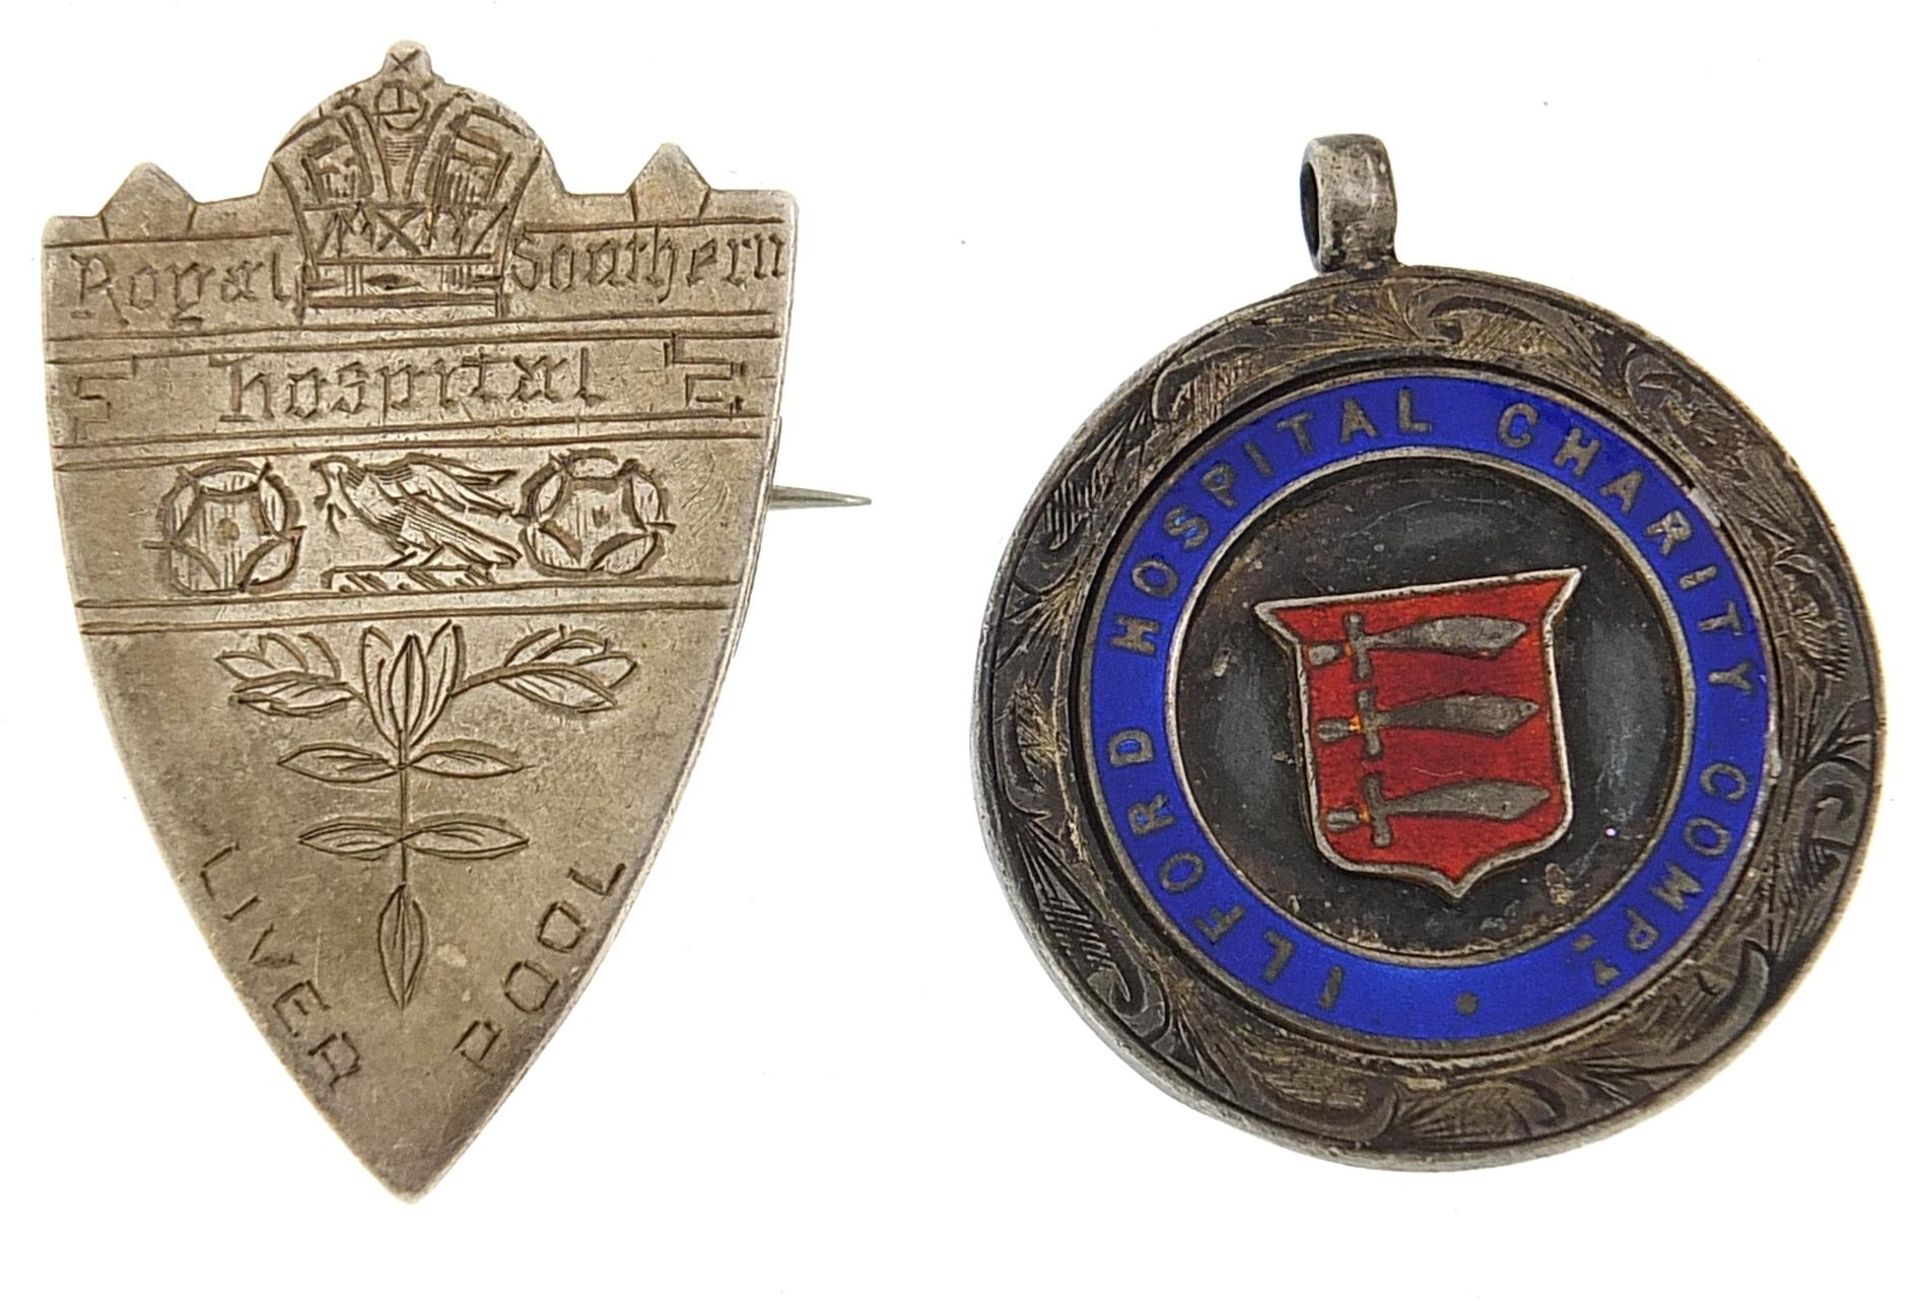 Royal Southern hospital Liverpool silver badge together with a silver an enamel Ilford Hospital